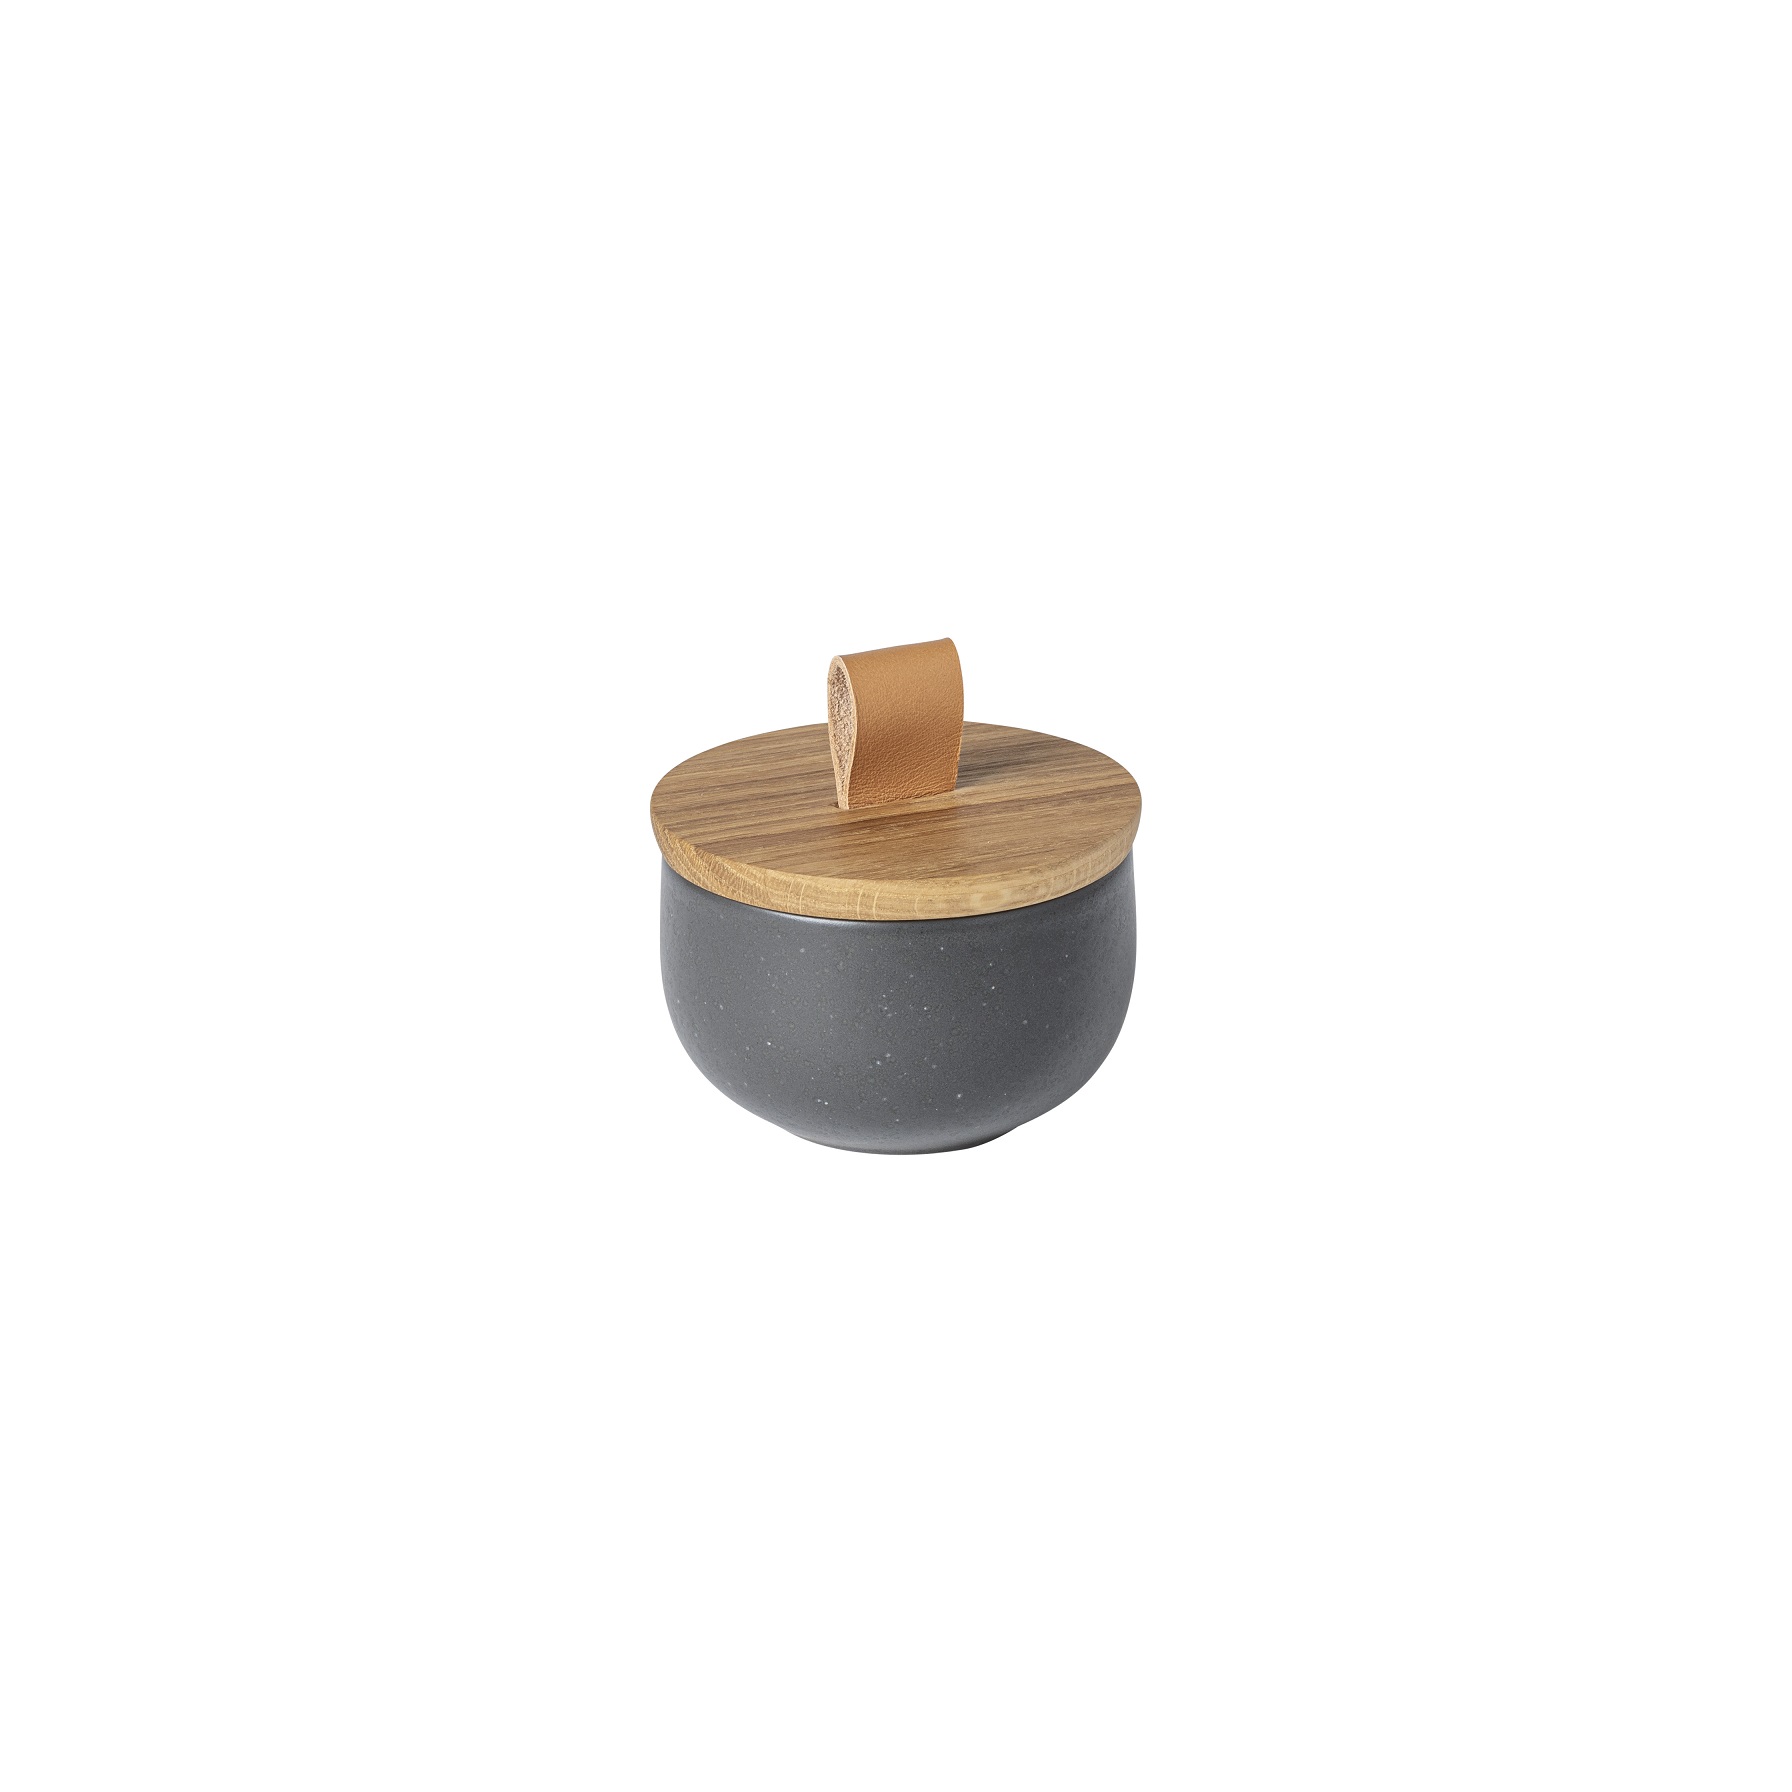 Pacifica Seed Grey Salt Cellar 9cm With Oak Lid Gift